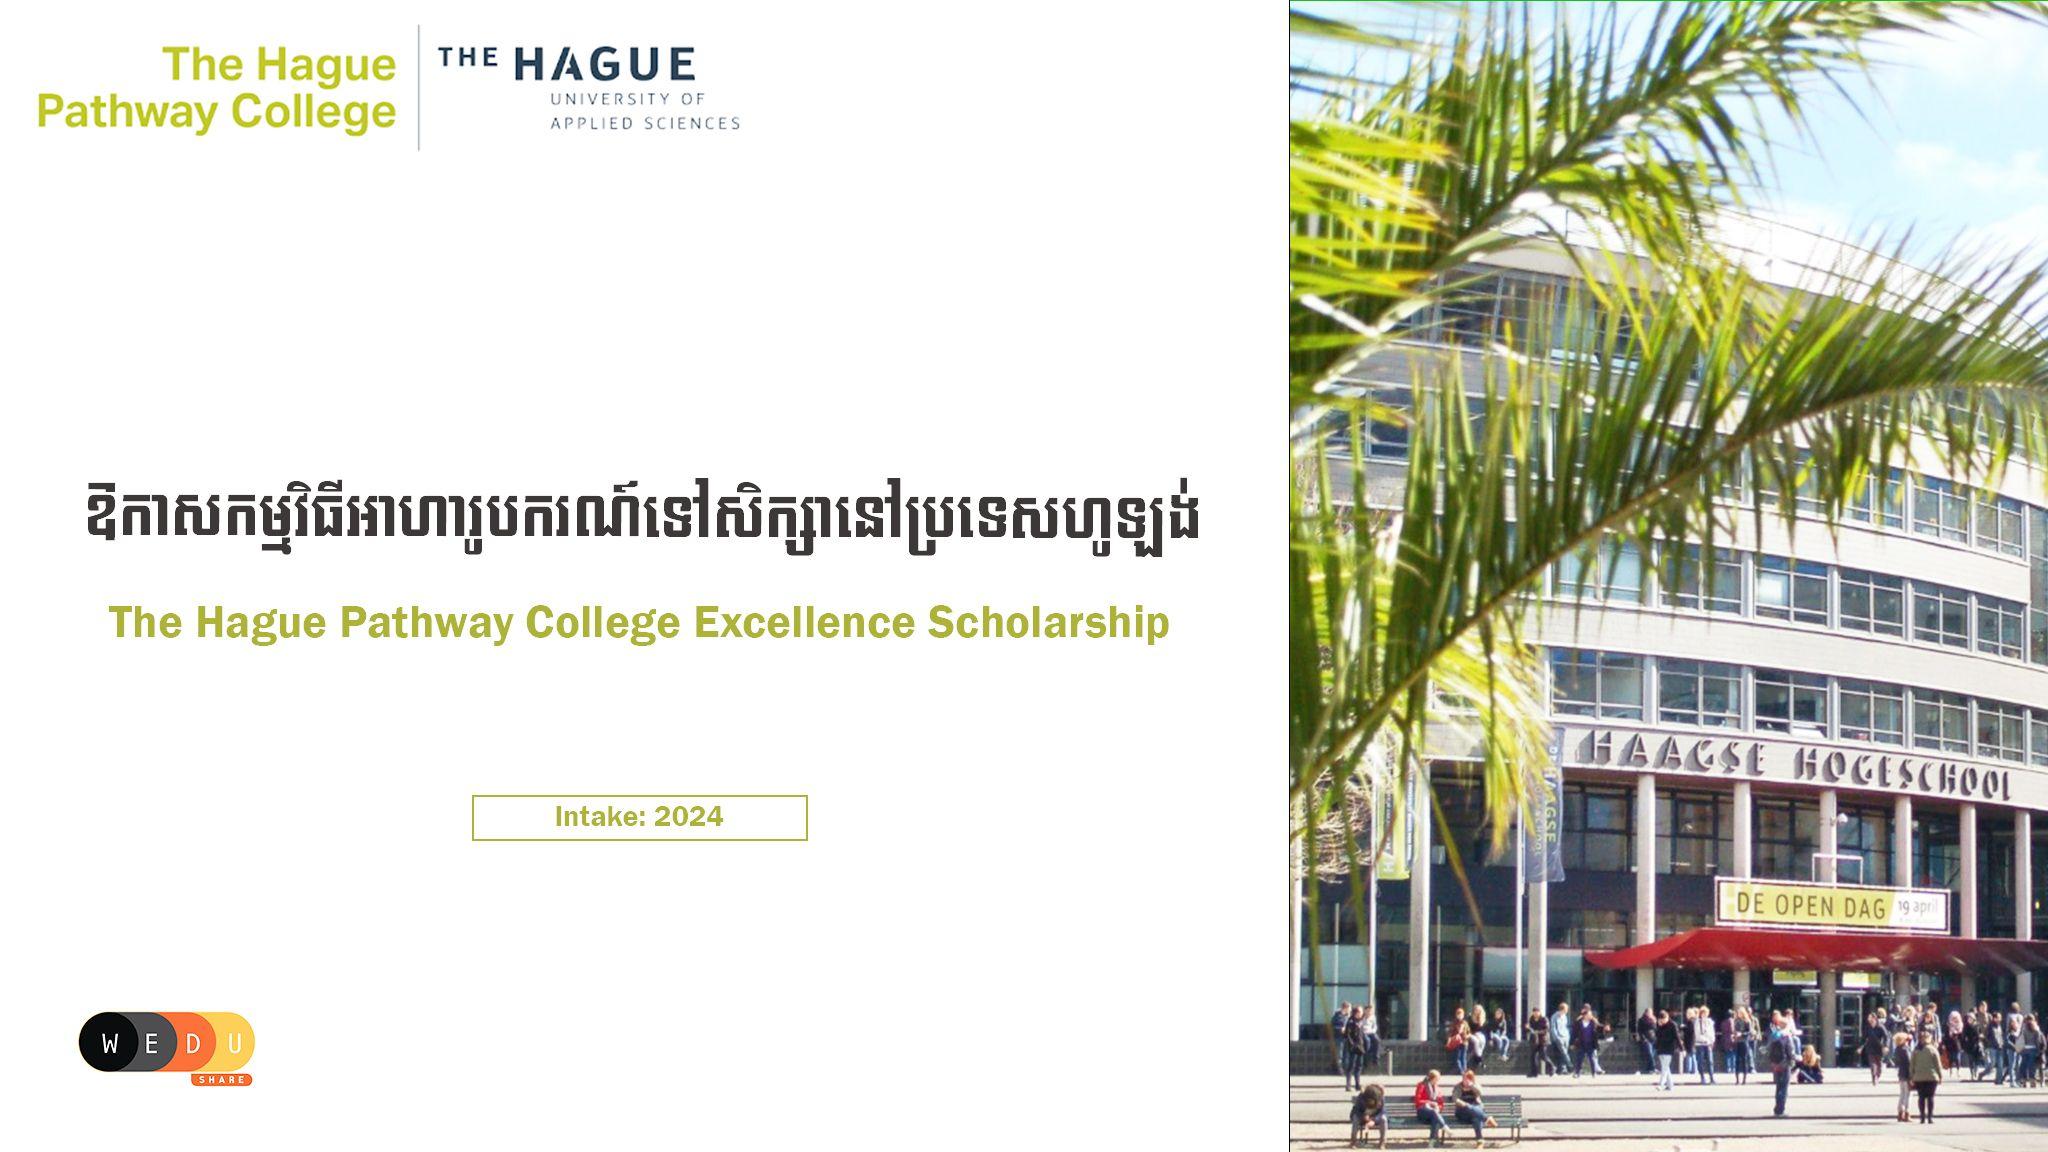 The Hague Pathway College Excellence Scholarship